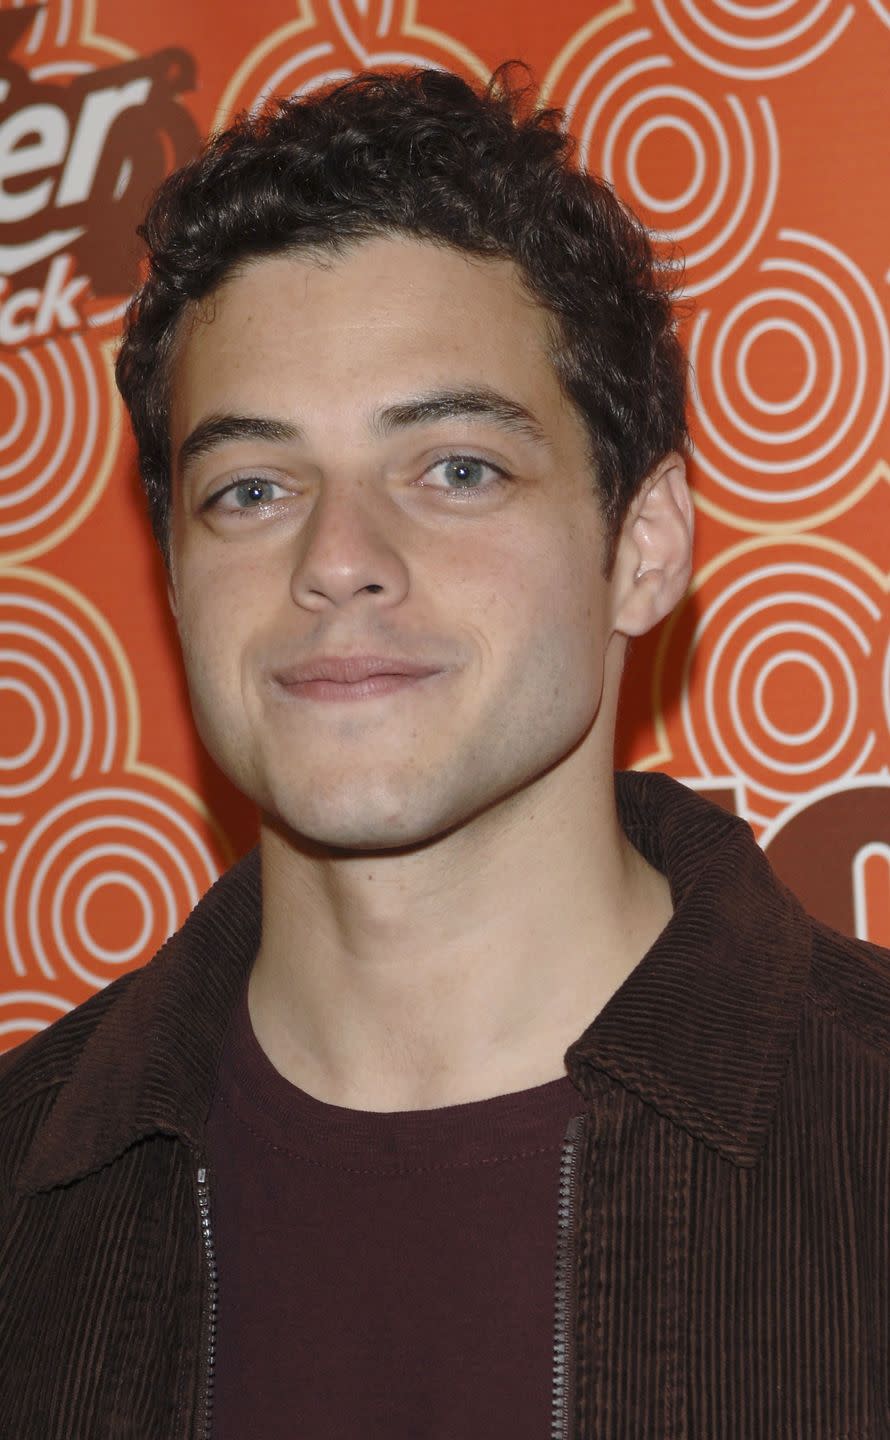 <p>Rami Malek hasn't been a big name in Hollywood for long, but he's still made quite an impression. Malek started his career with a few small roles, like ones on the shows <em>Gilmore Girls </em>and<em> 24. </em>In 2015, he nabbed his breakthrough role on <em>Mr. Robot</em>, which helped propel him into film.</p>